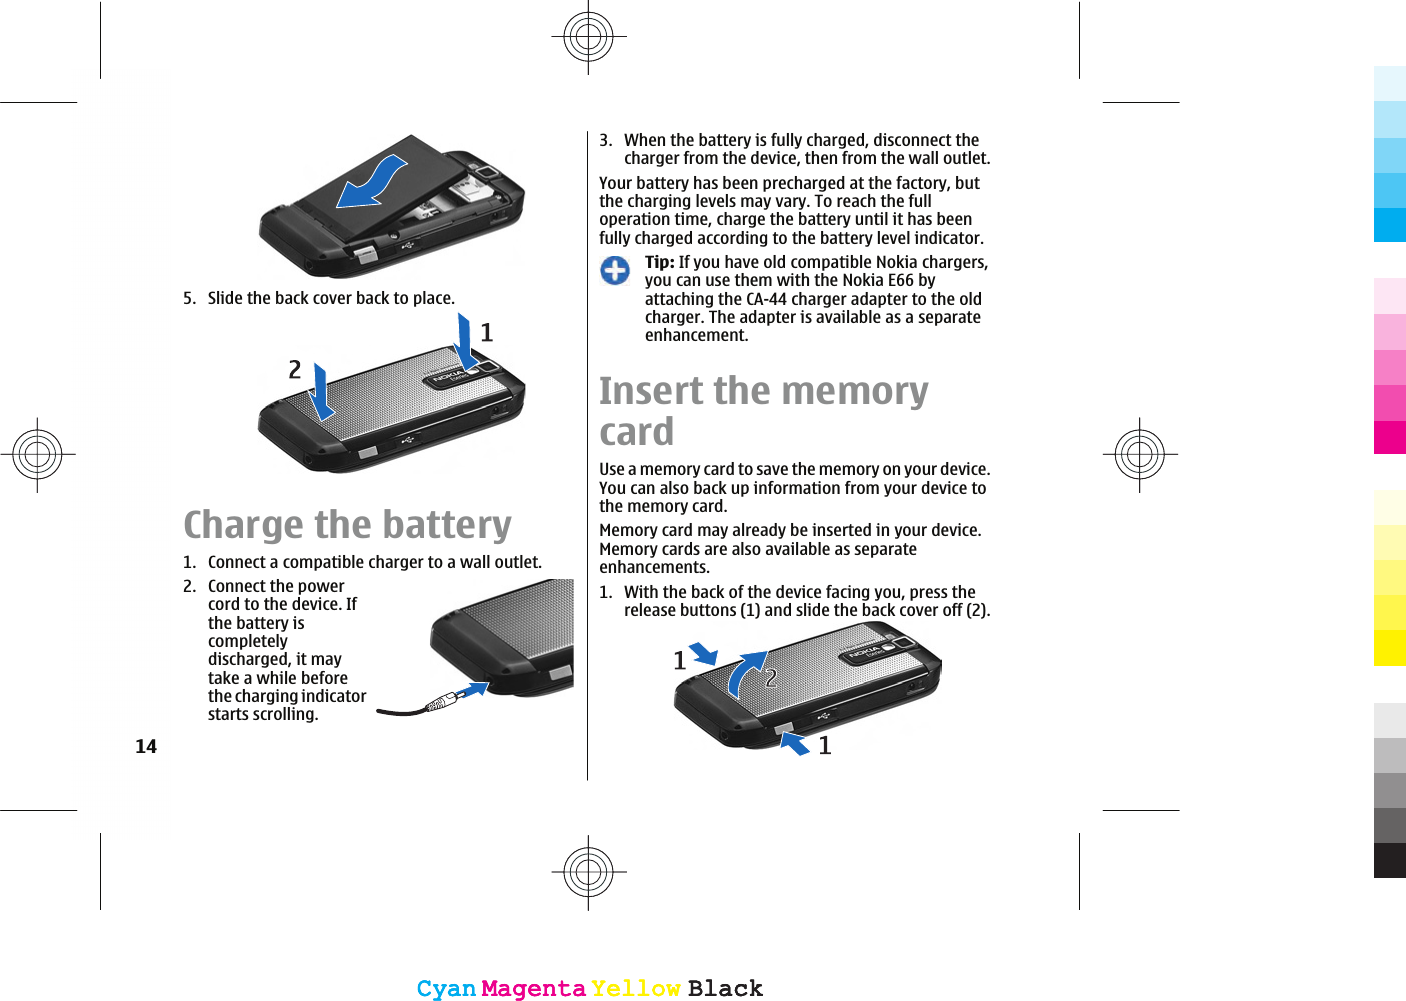 5. Slide the back cover back to place.Charge the battery1. Connect a compatible charger to a wall outlet.2. Connect the powercord to the device. Ifthe battery iscompletelydischarged, it maytake a while beforethe charging indicatorstarts scrolling.3. When the battery is fully charged, disconnect thecharger from the device, then from the wall outlet.Your battery has been precharged at the factory, butthe charging levels may vary. To reach the fulloperation time, charge the battery until it has beenfully charged according to the battery level indicator.Tip: If you have old compatible Nokia chargers,you can use them with the Nokia E66 byattaching the CA-44 charger adapter to the oldcharger. The adapter is available as a separateenhancement.Insert the memorycardUse a memory card to save the memory on your device.You can also back up information from your device tothe memory card.Memory card may already be inserted in your device.Memory cards are also available as separateenhancements.1. With the back of the device facing you, press therelease buttons (1) and slide the back cover off (2).14CyanCyanMagentaMagentaYellowYellowBlackBlackCyanCyanMagentaMagentaYellowYellowBlackBlack